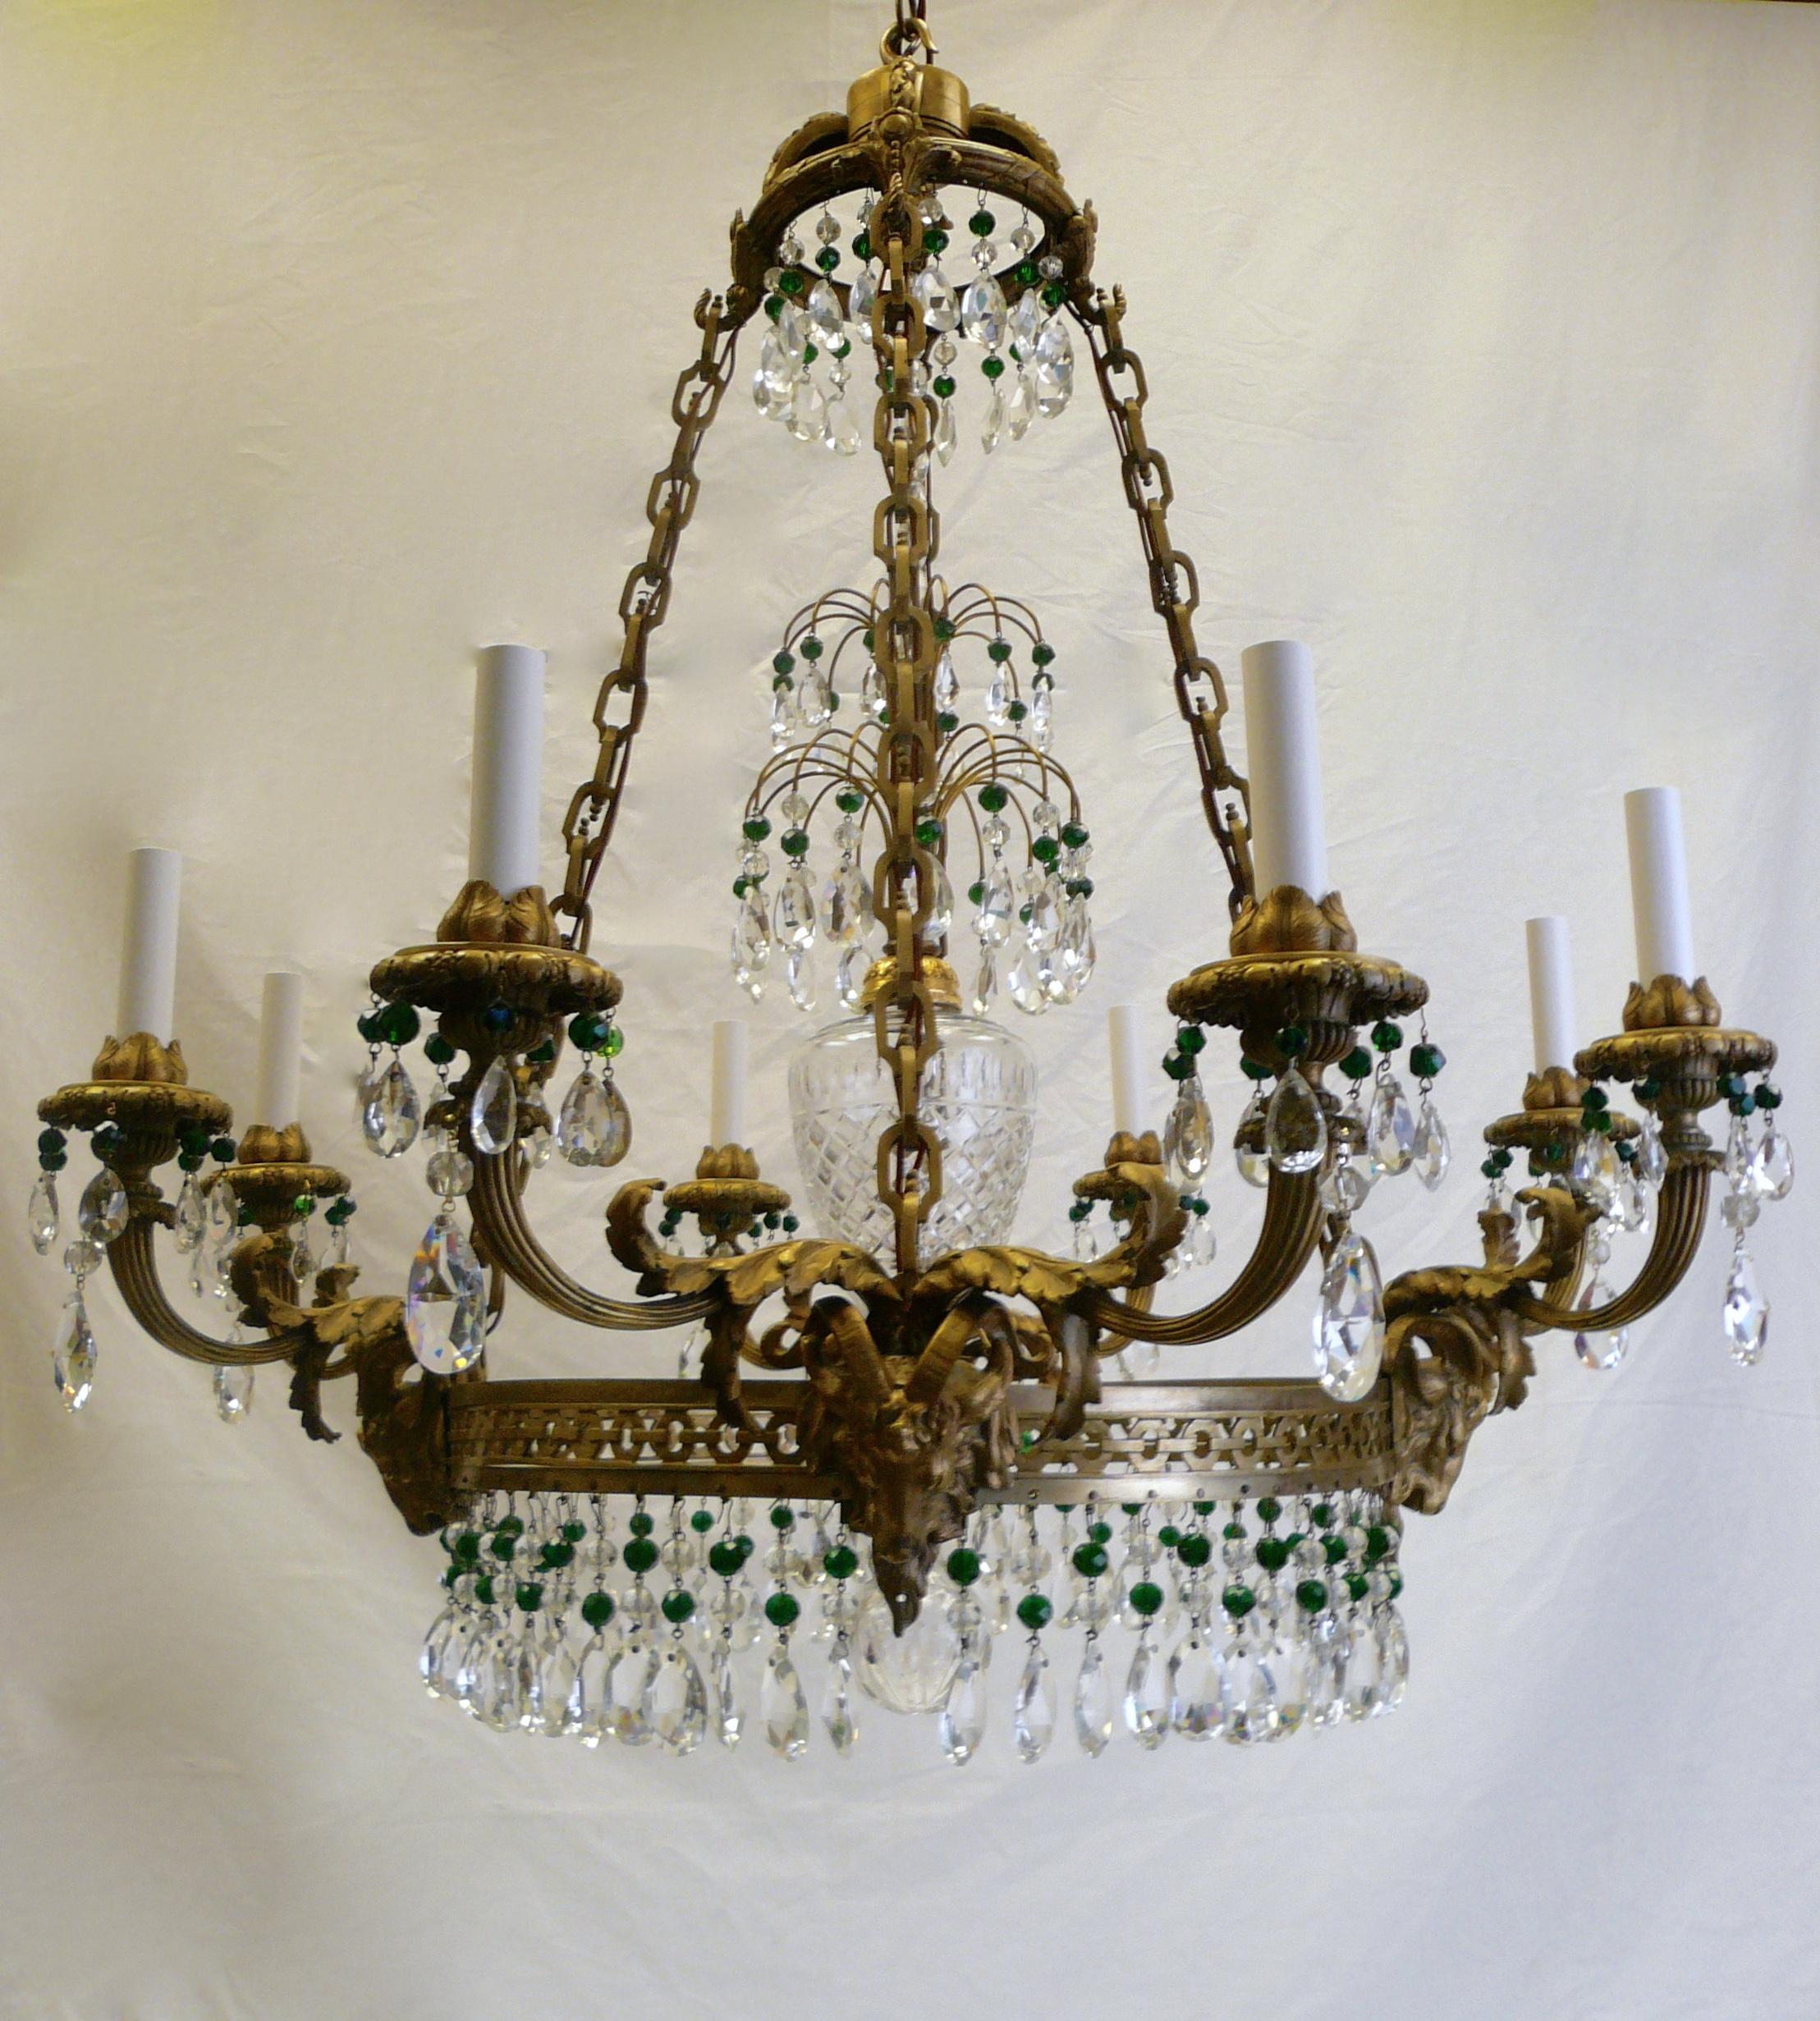 19th Century Russian Neoclassical or Baltic Style Bronze and Crystal Chandelier For Sale